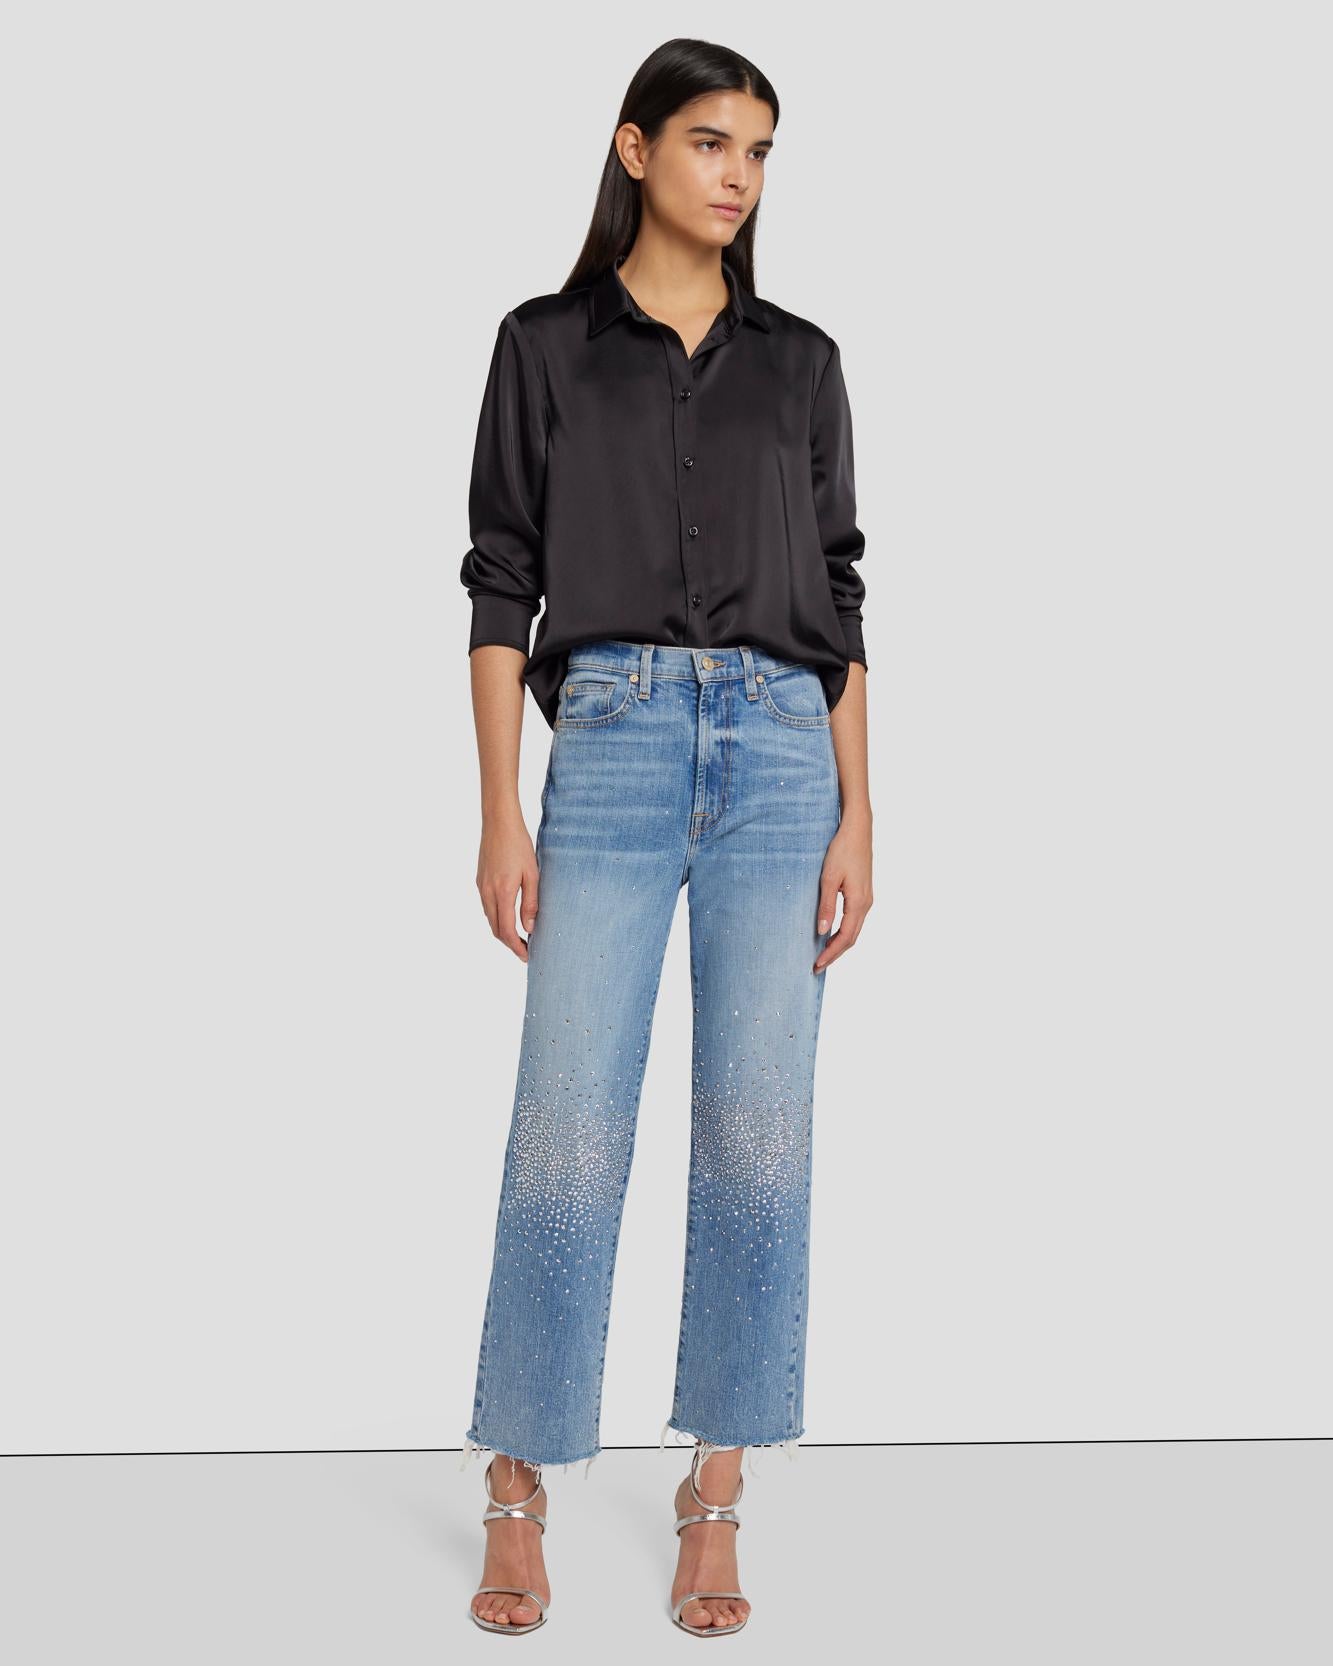 Logan Embellished Stovepipe in Ode To | 7 For All Mankind